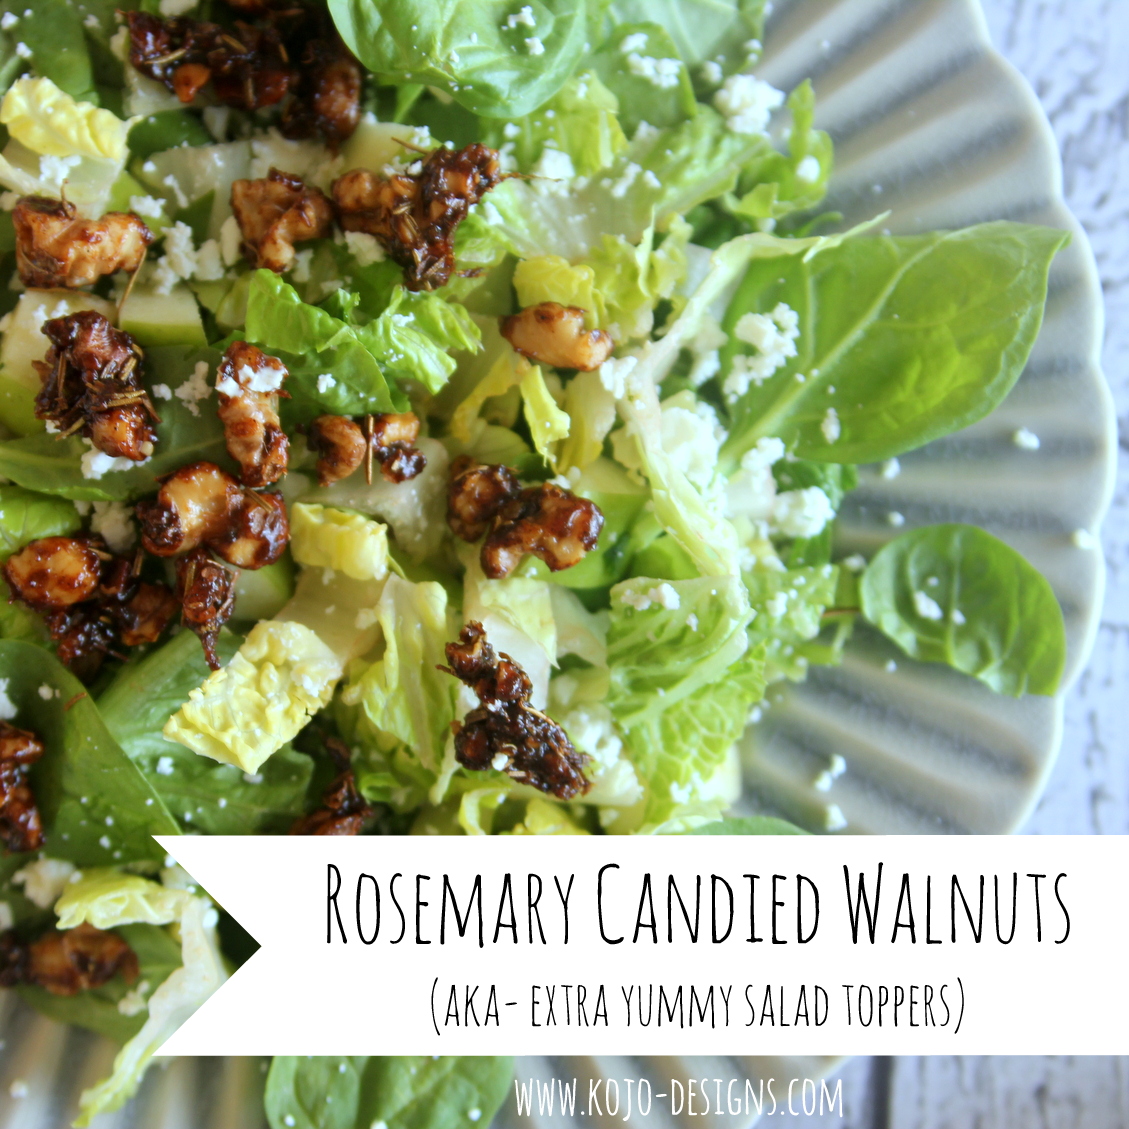 rosemary candied walnuts- the most delicious salad toppers